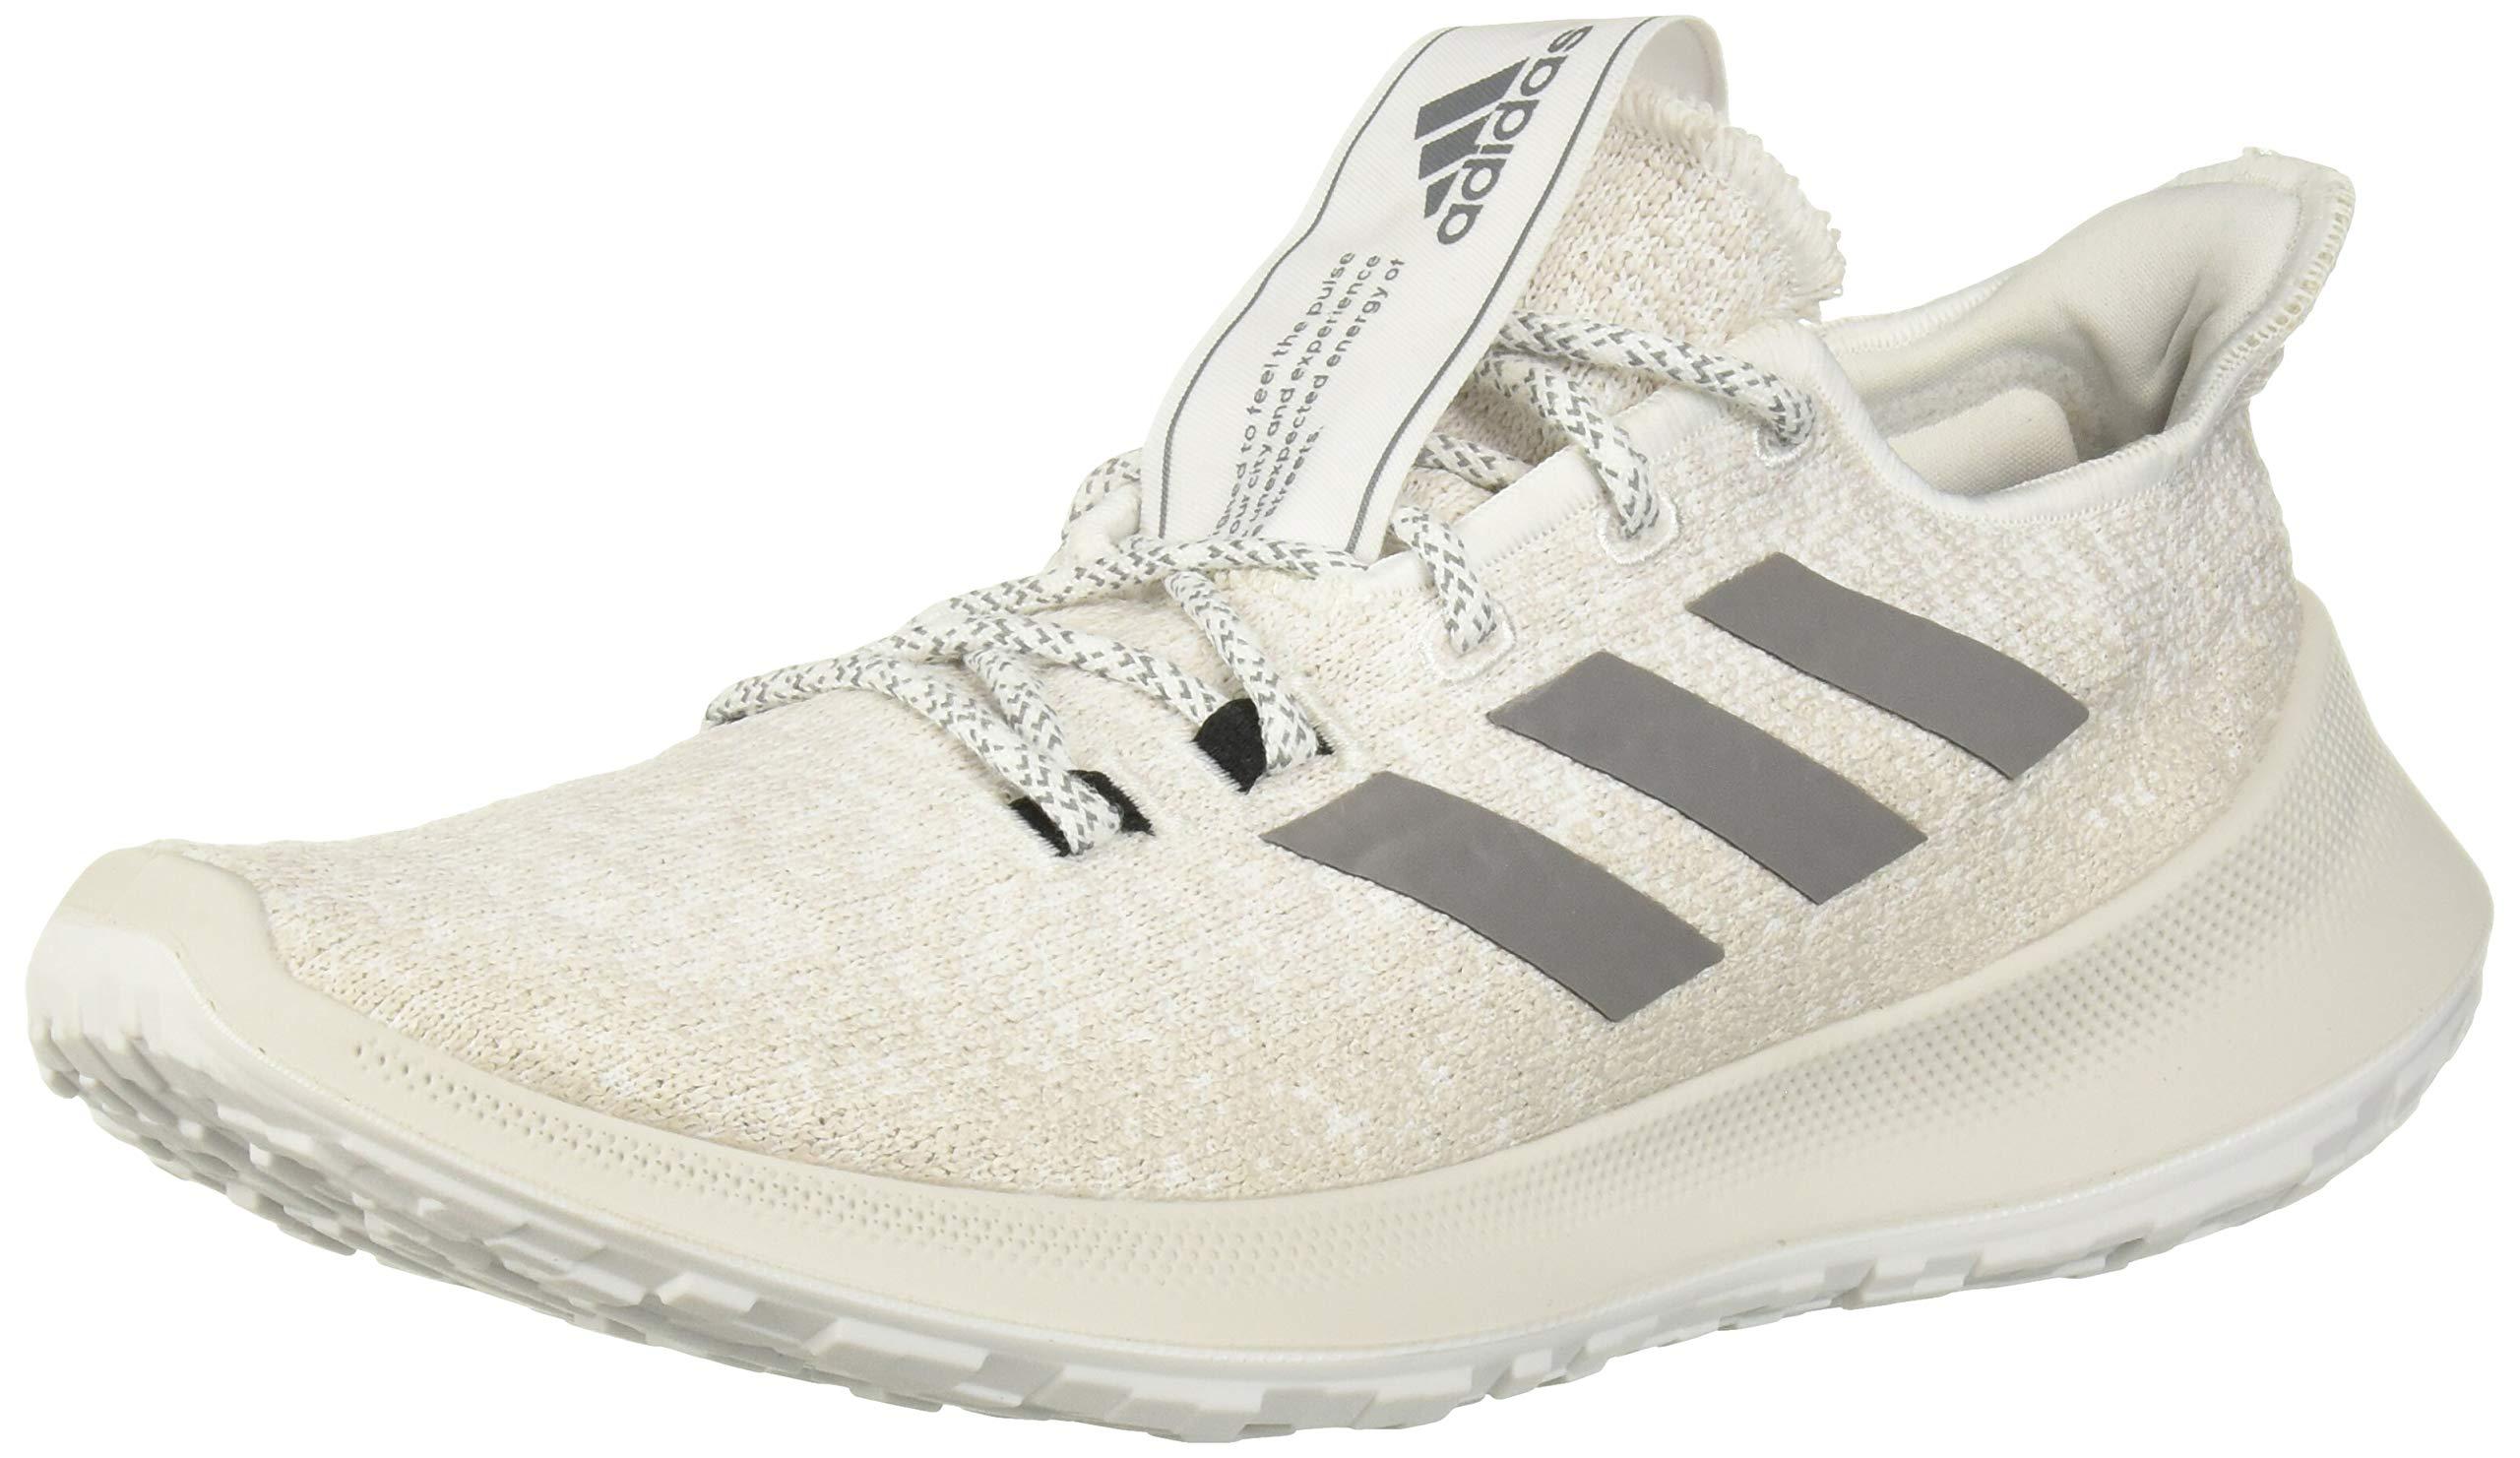 adidas Lace Sensebounce + Running Shoe in White/Grey/Chalk Pearl (White) |  Lyst